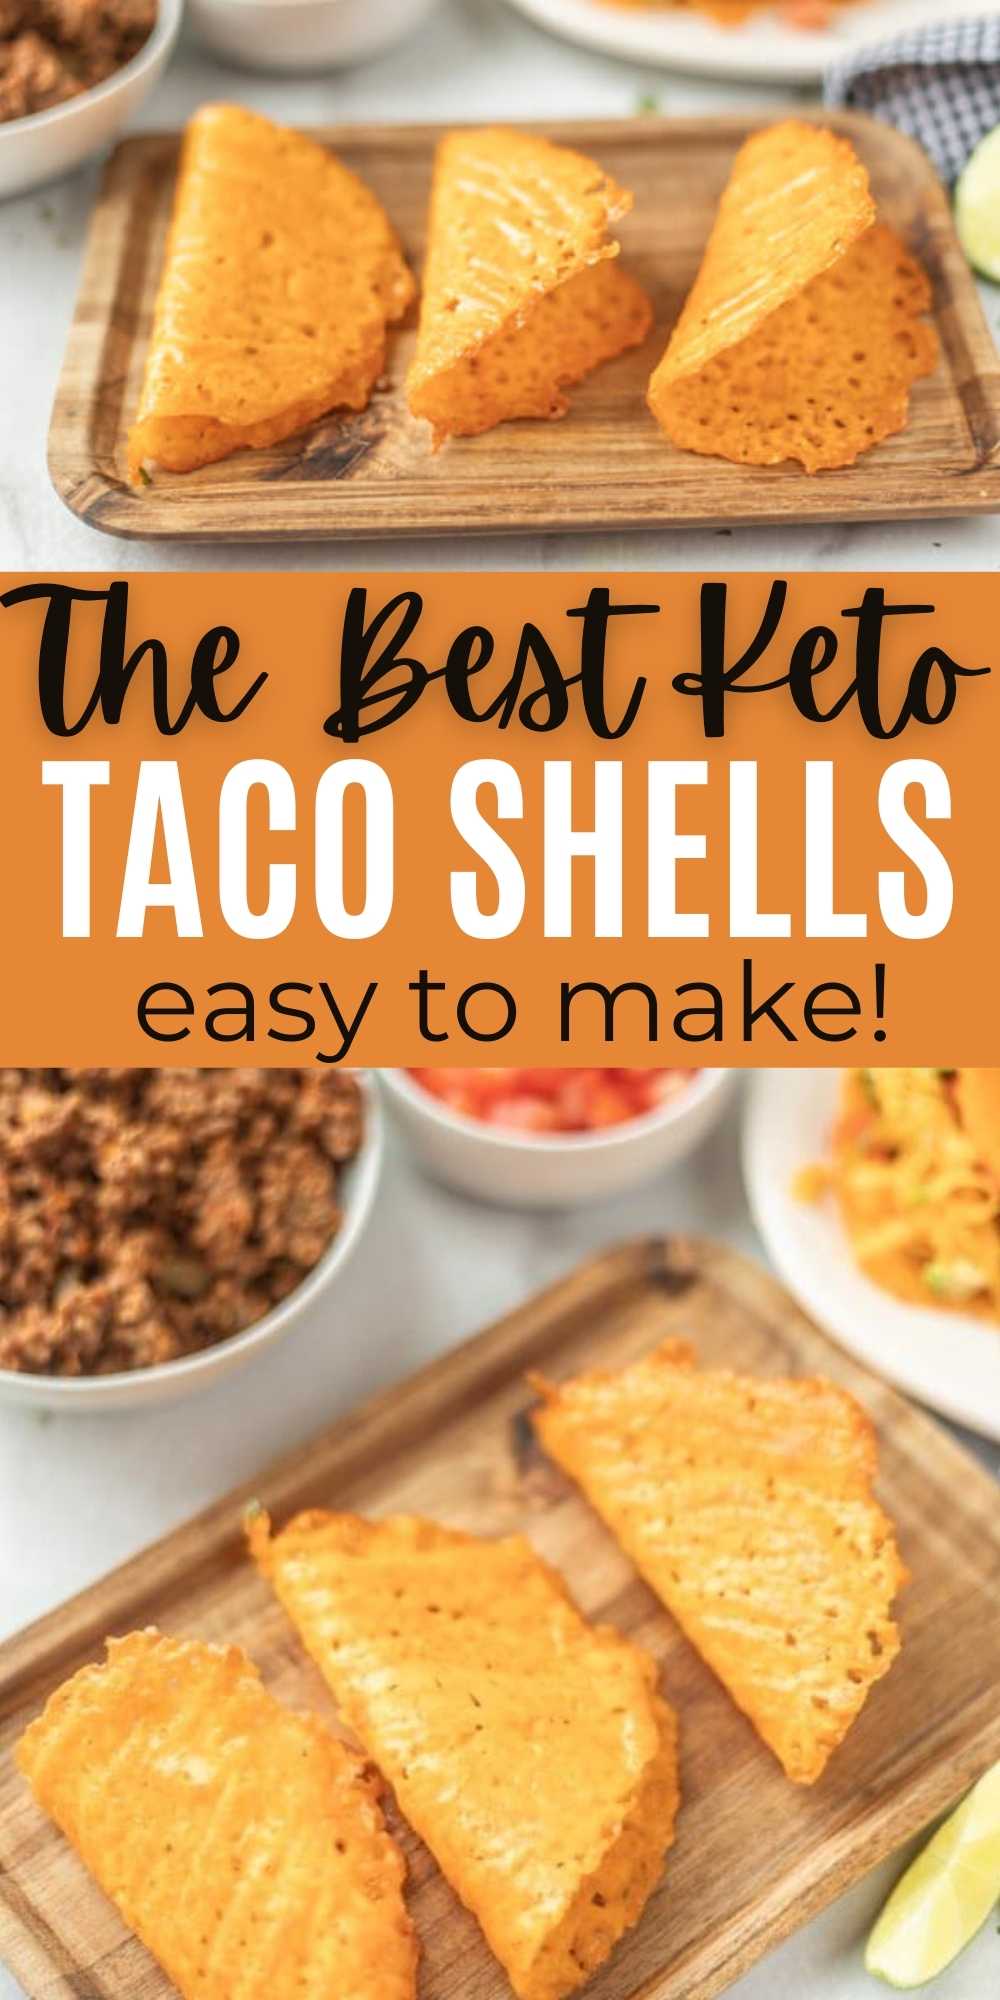 These keto cheese taco shells are perfect for taco night to enjoy a low carb taco.   Each easy taco shell is only 1 net carb and is made with just cheese.  You’ll love this easy Keto Taco Shells recipe.  #eatingonadime #ketorecipes #lowcarbrecipes #tacorecipes 
